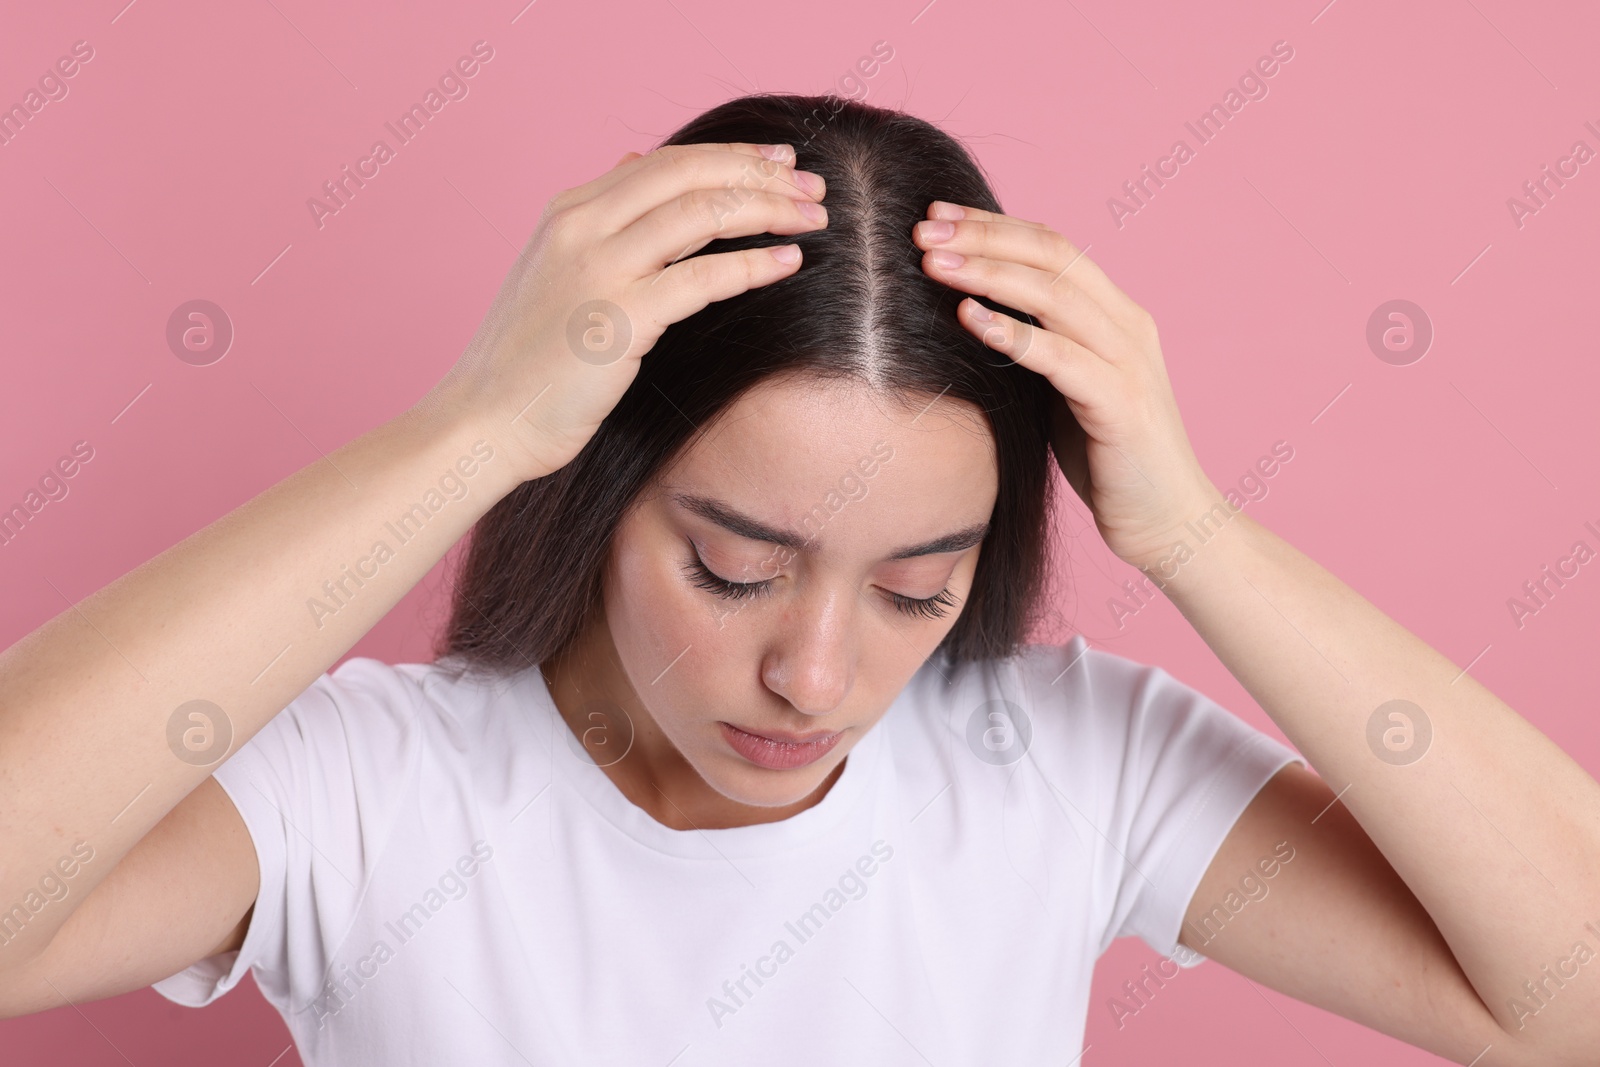 Photo of Woman examining her hair and scalp on pink background